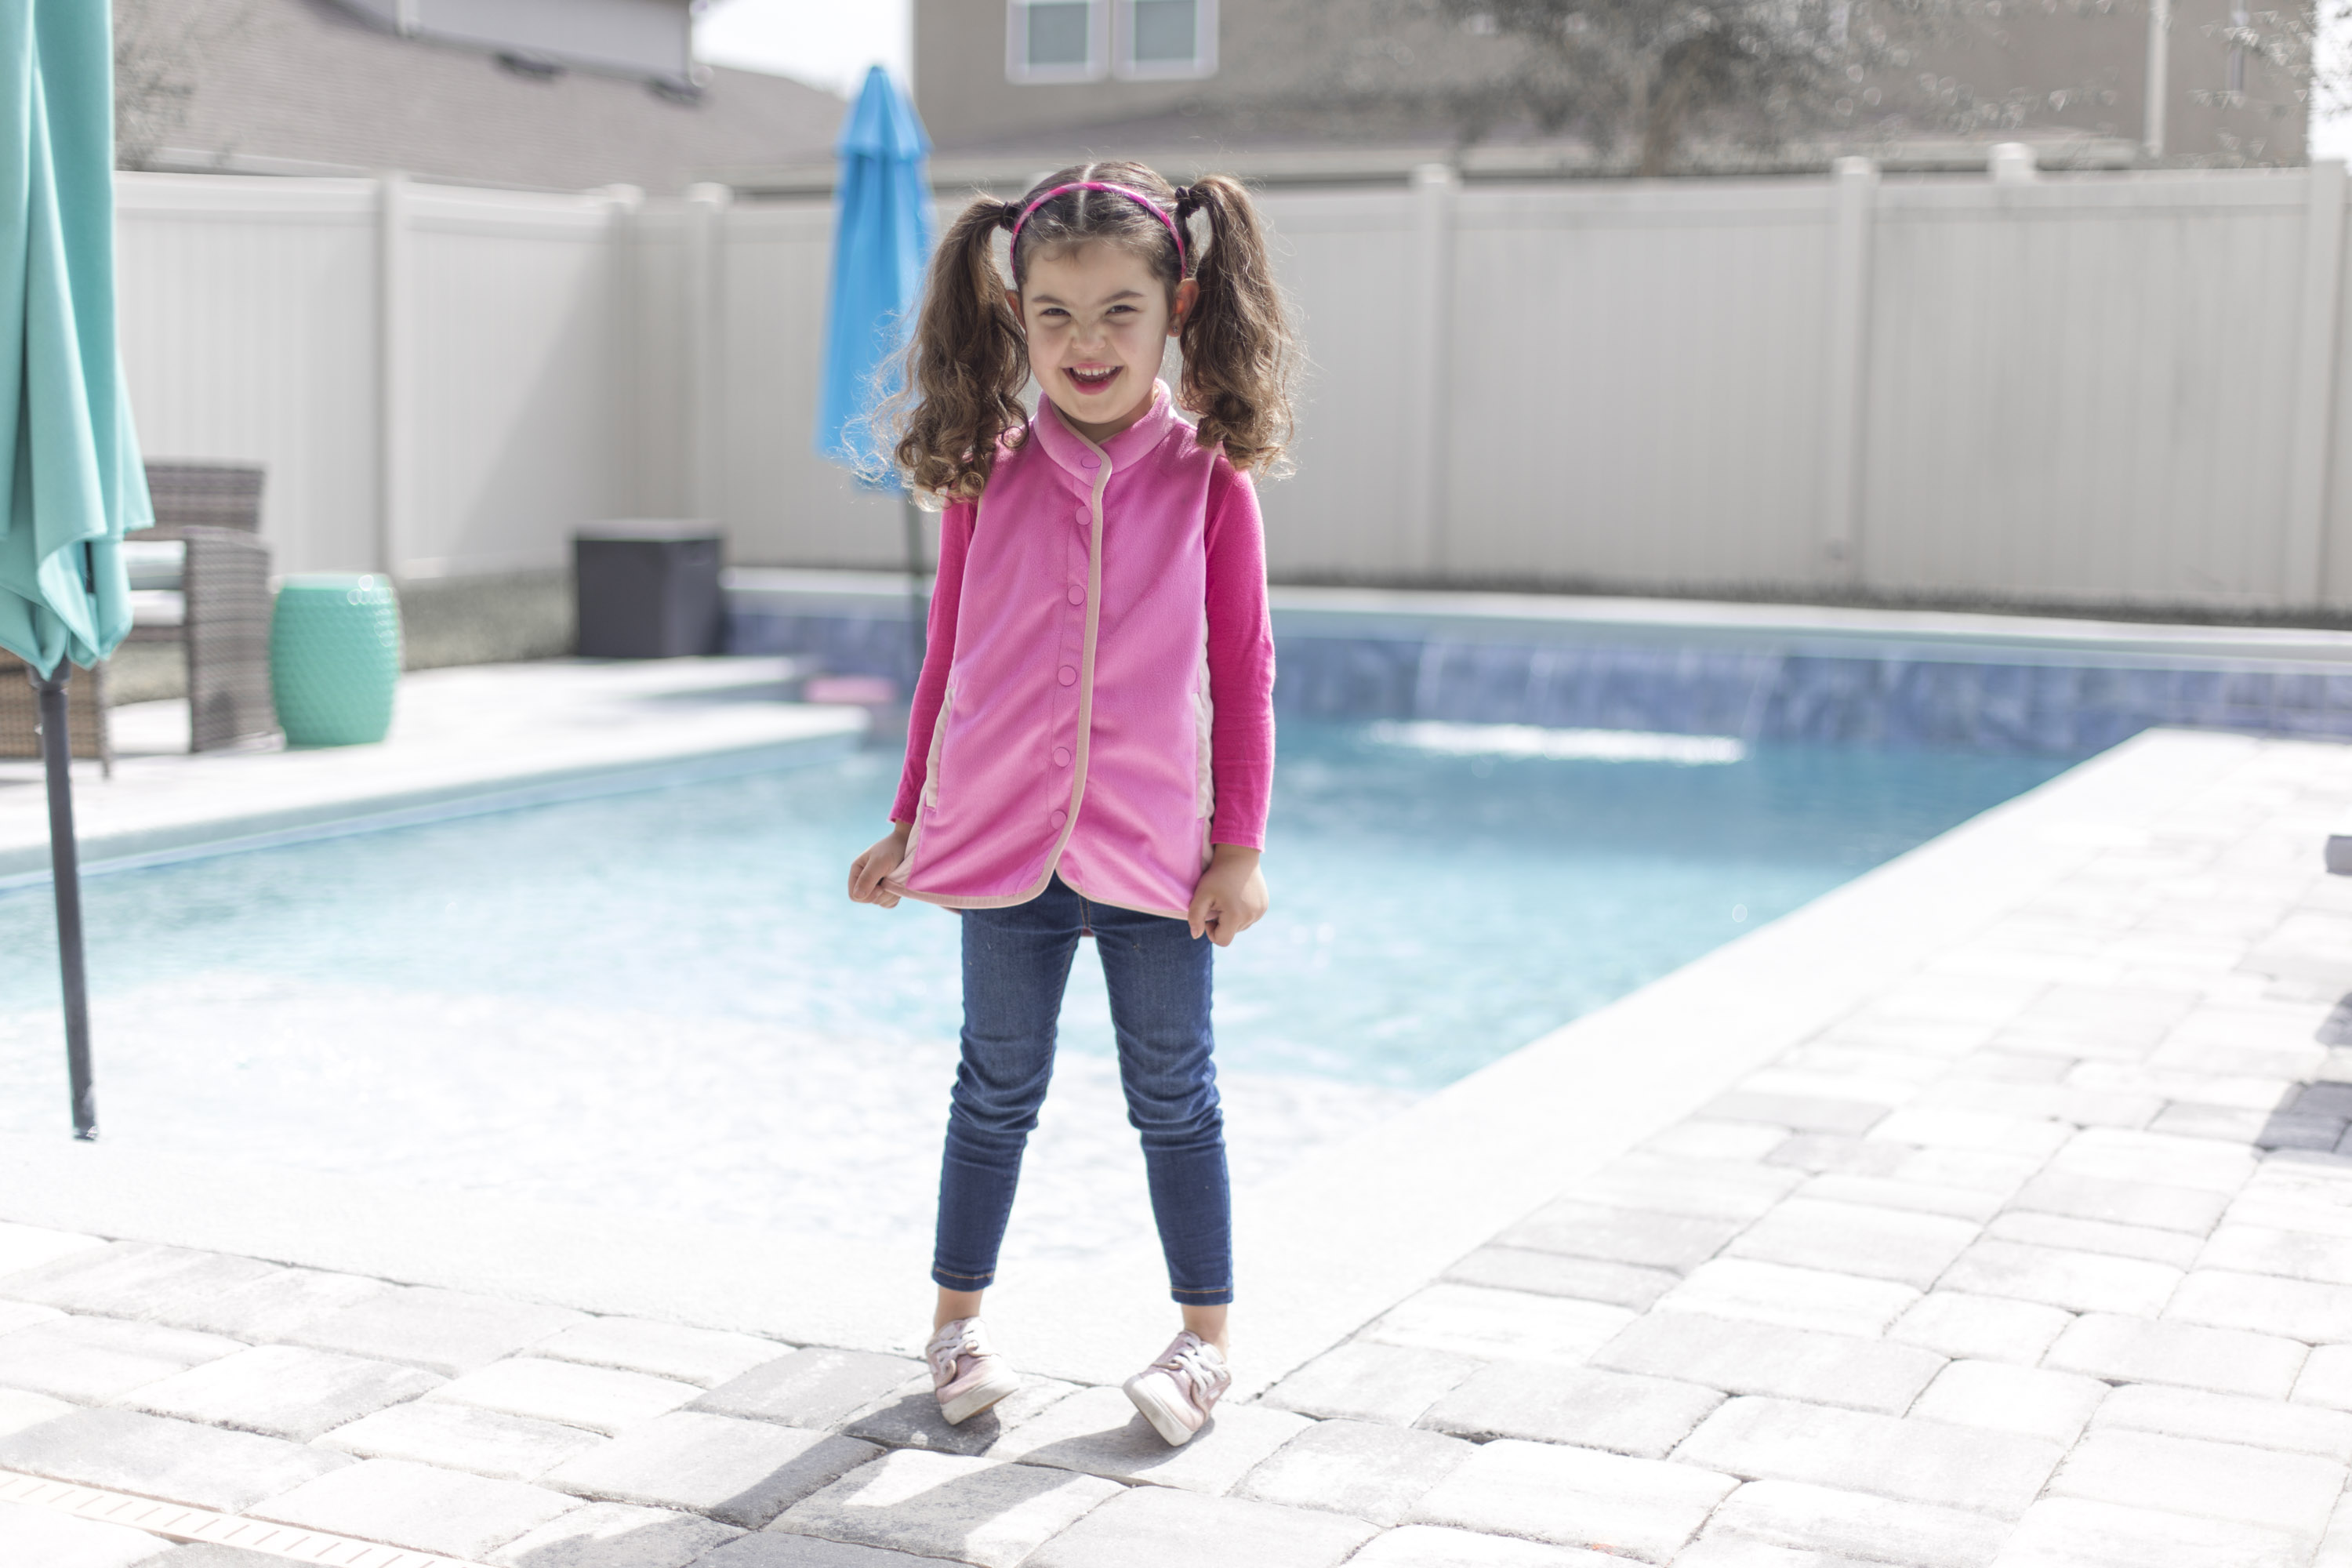 Dressing your kids for school when the temps are cool in the morning and warm in the afternoon can be difficult. MerriMane coats can help! 